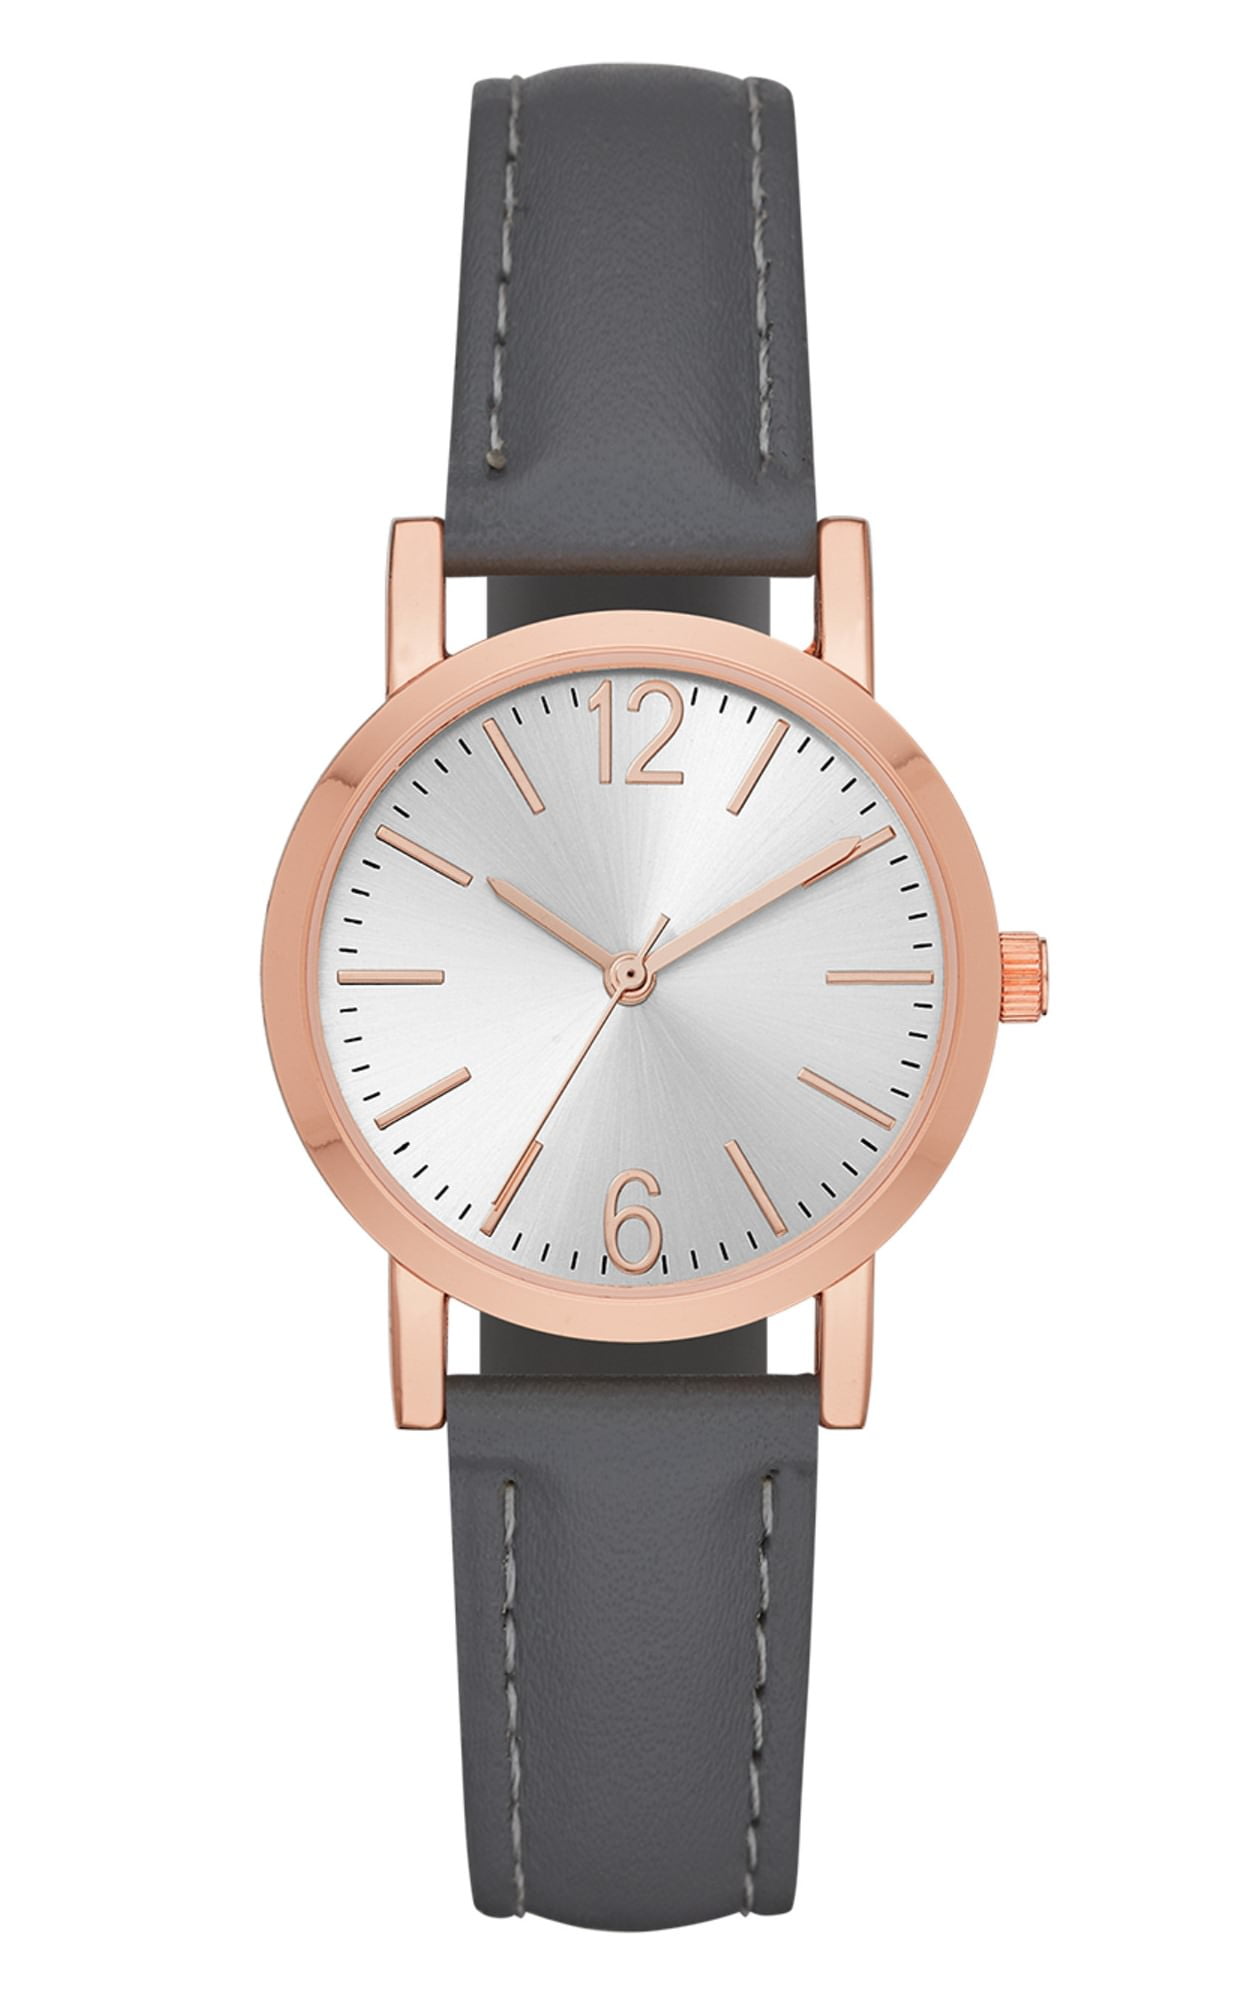 Women's Casual Watch with Grey Vegan Leather Strap and Easy Read Dial ...